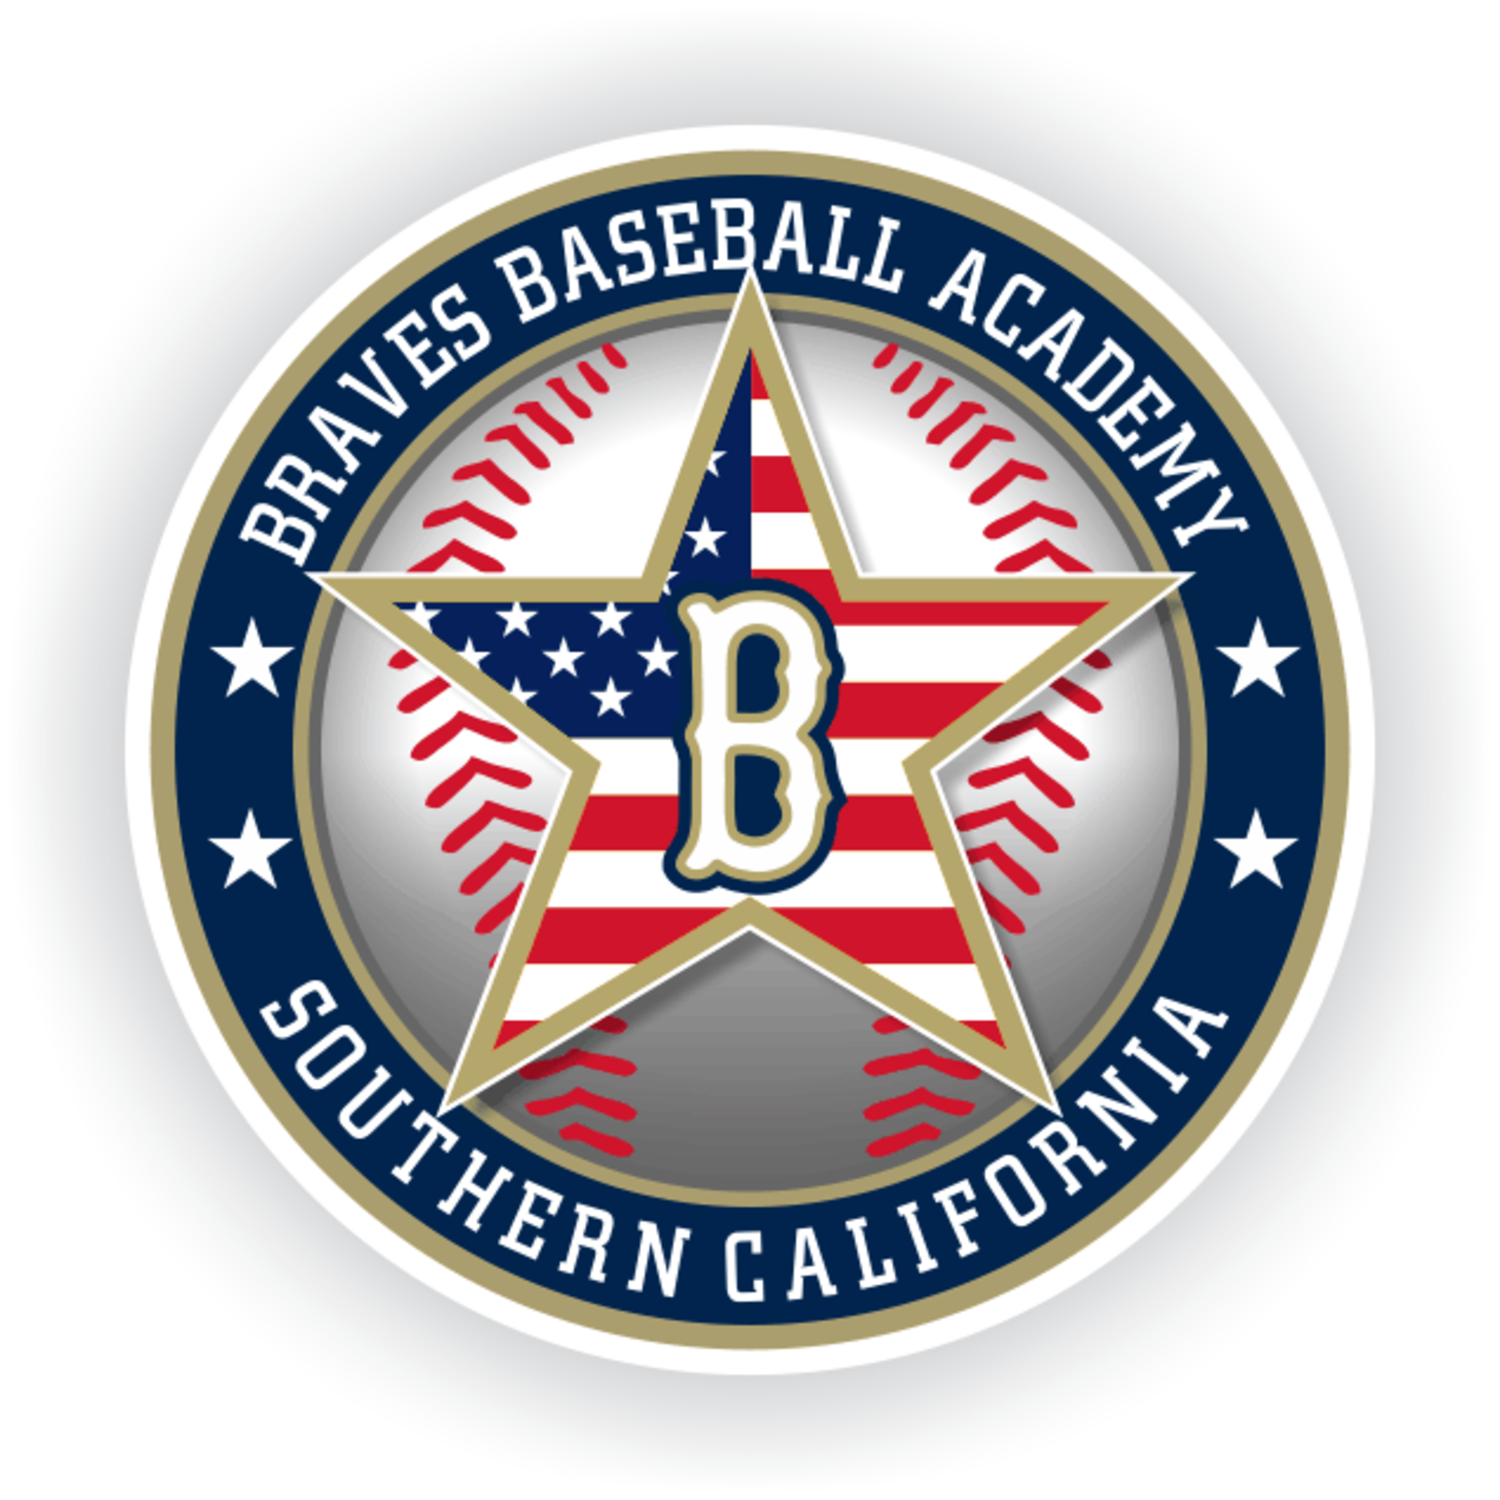 Braves Baseball Academy Stars and Stripes Window Decal - Bagger Sports